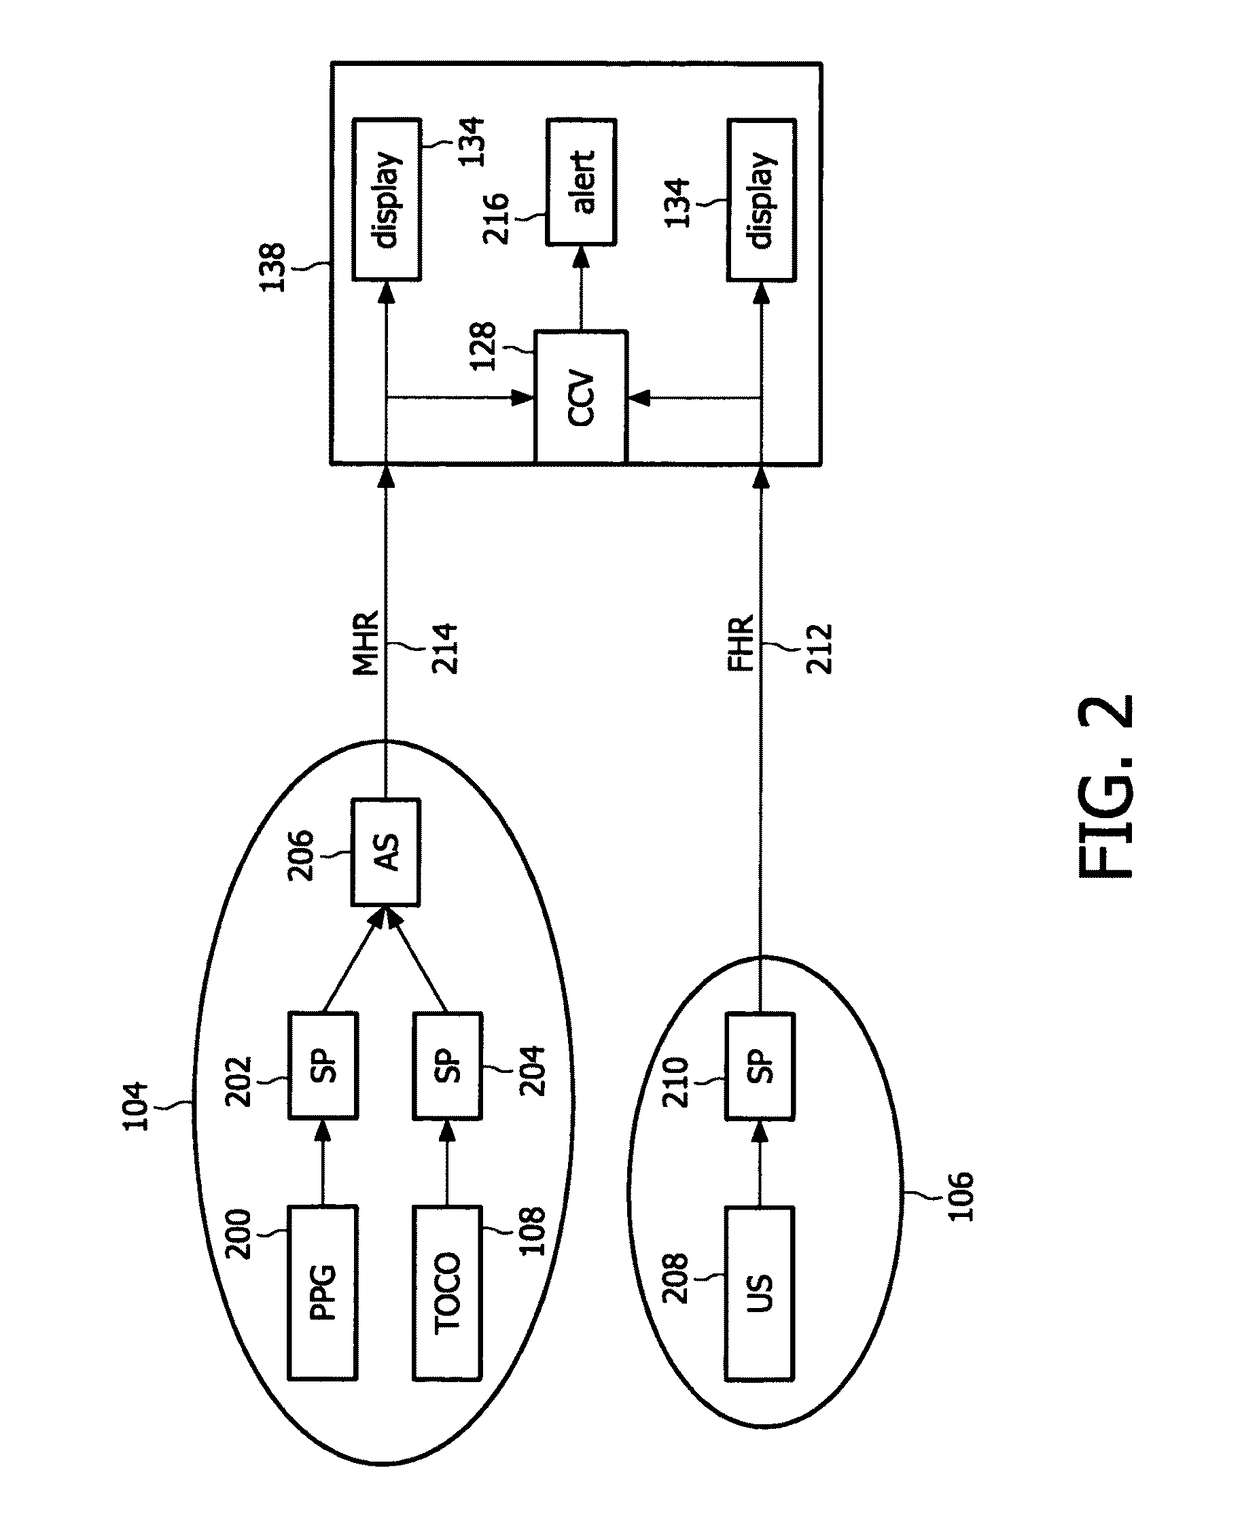 Method of monitoring a fetal heart rate